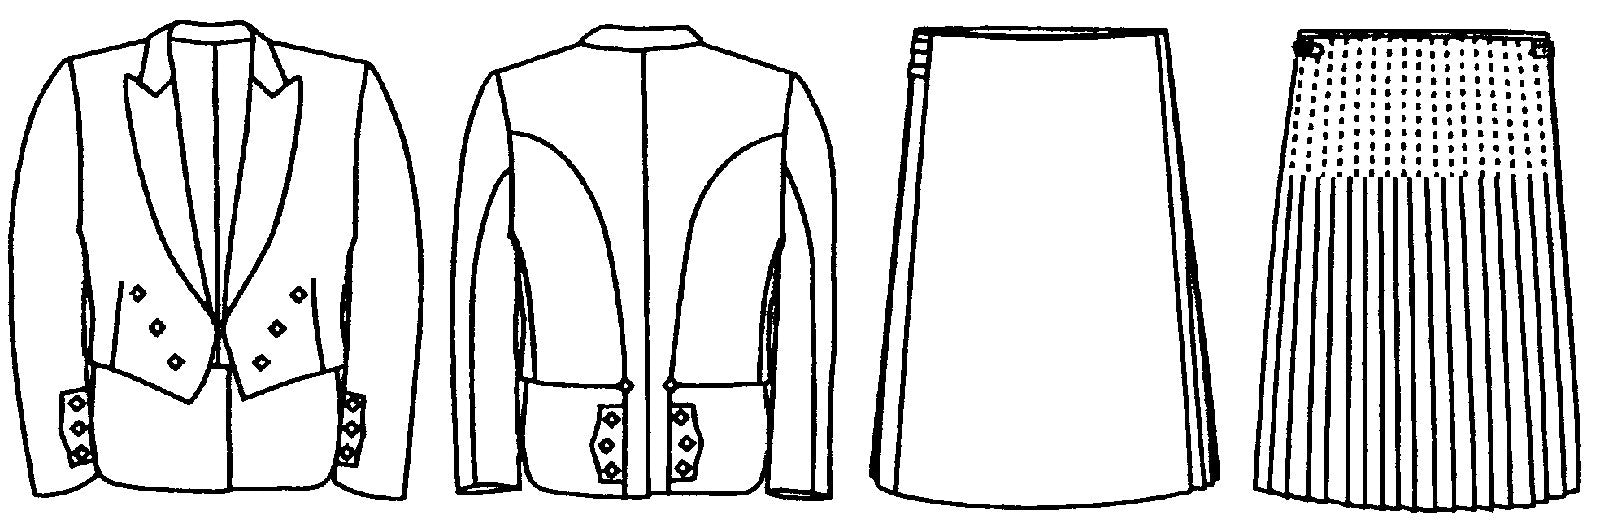 Flat line drawings of front and back views of Prince Charlie Jacket and Kilt